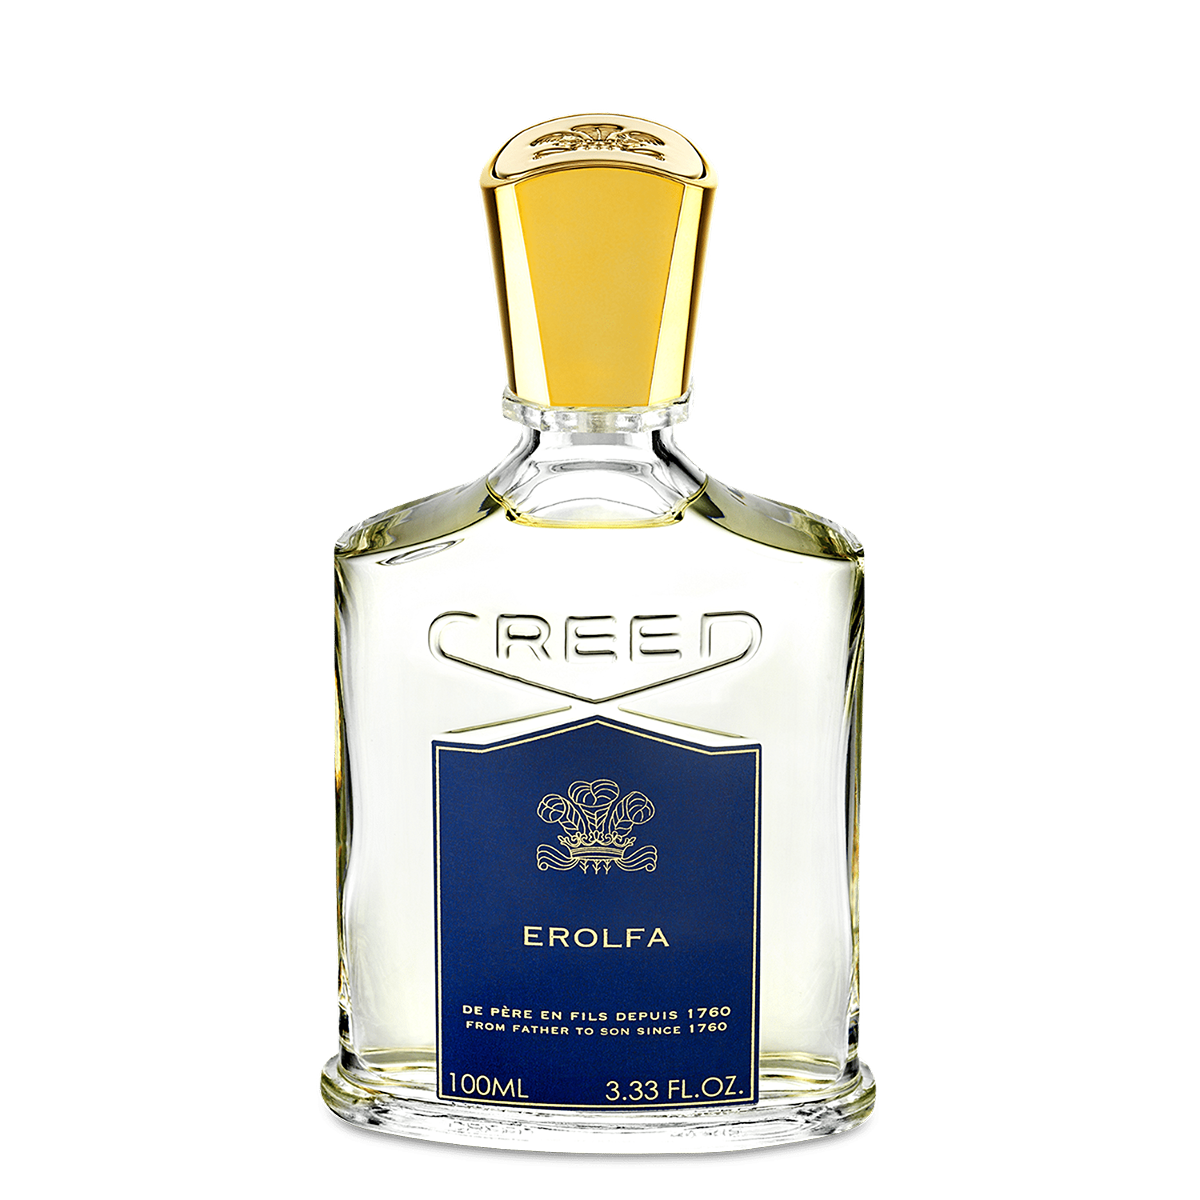 Creed's Erolfa Eau de Parfum 100ml offers an uplifting fragrance with a Mediterranean ocean and herbal signature.